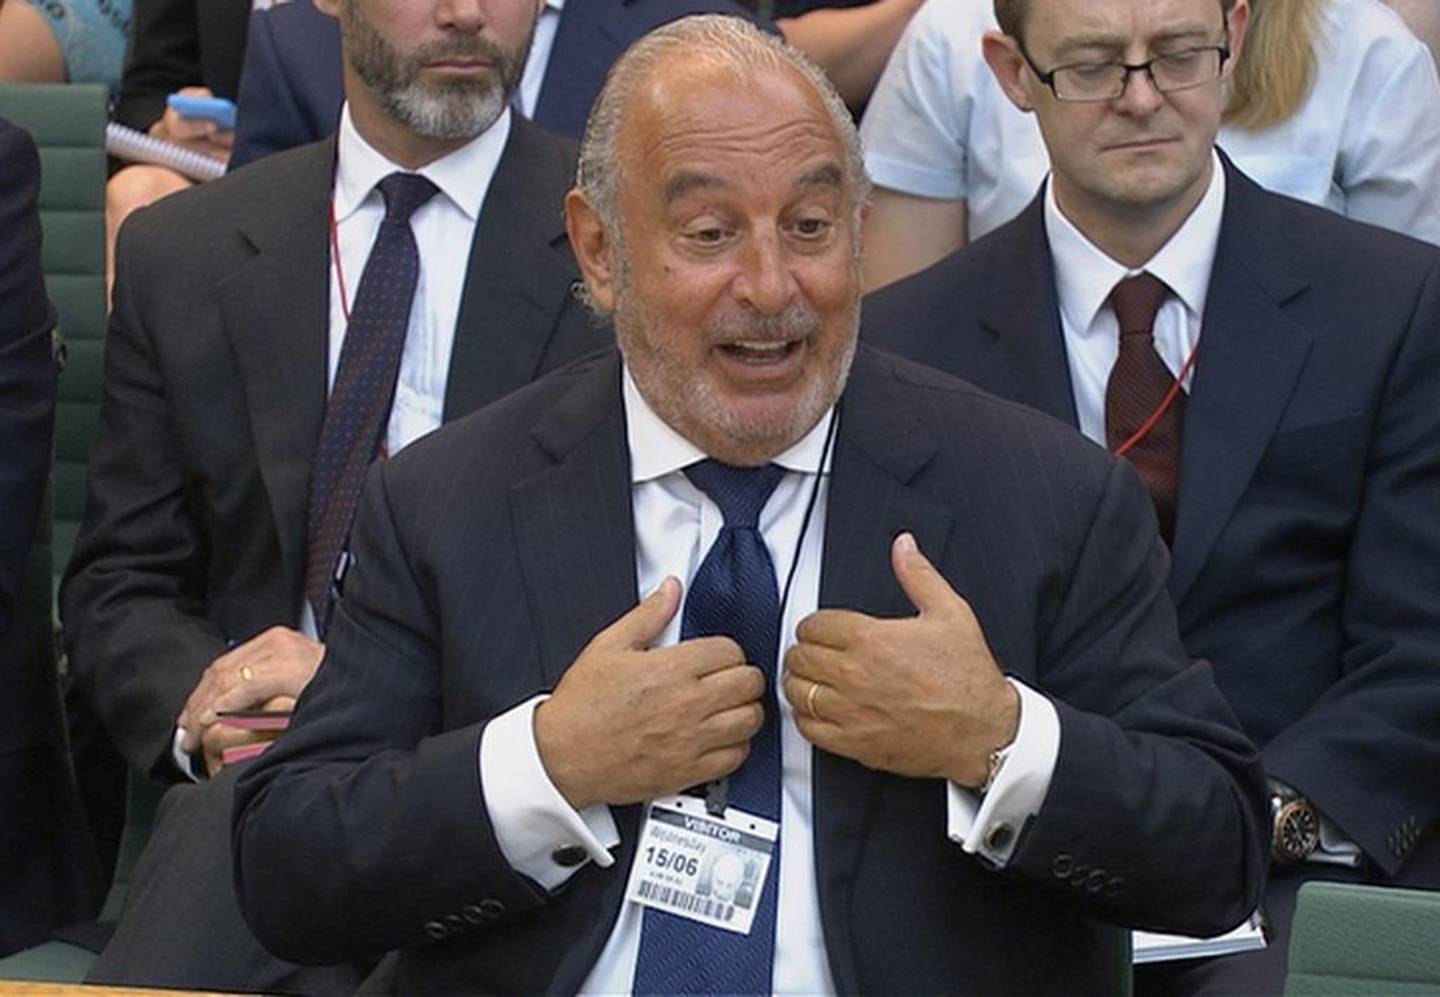 Philip Green was questioned by MPs in 2016 following the collapse of retail chain BHS. Parliament TV